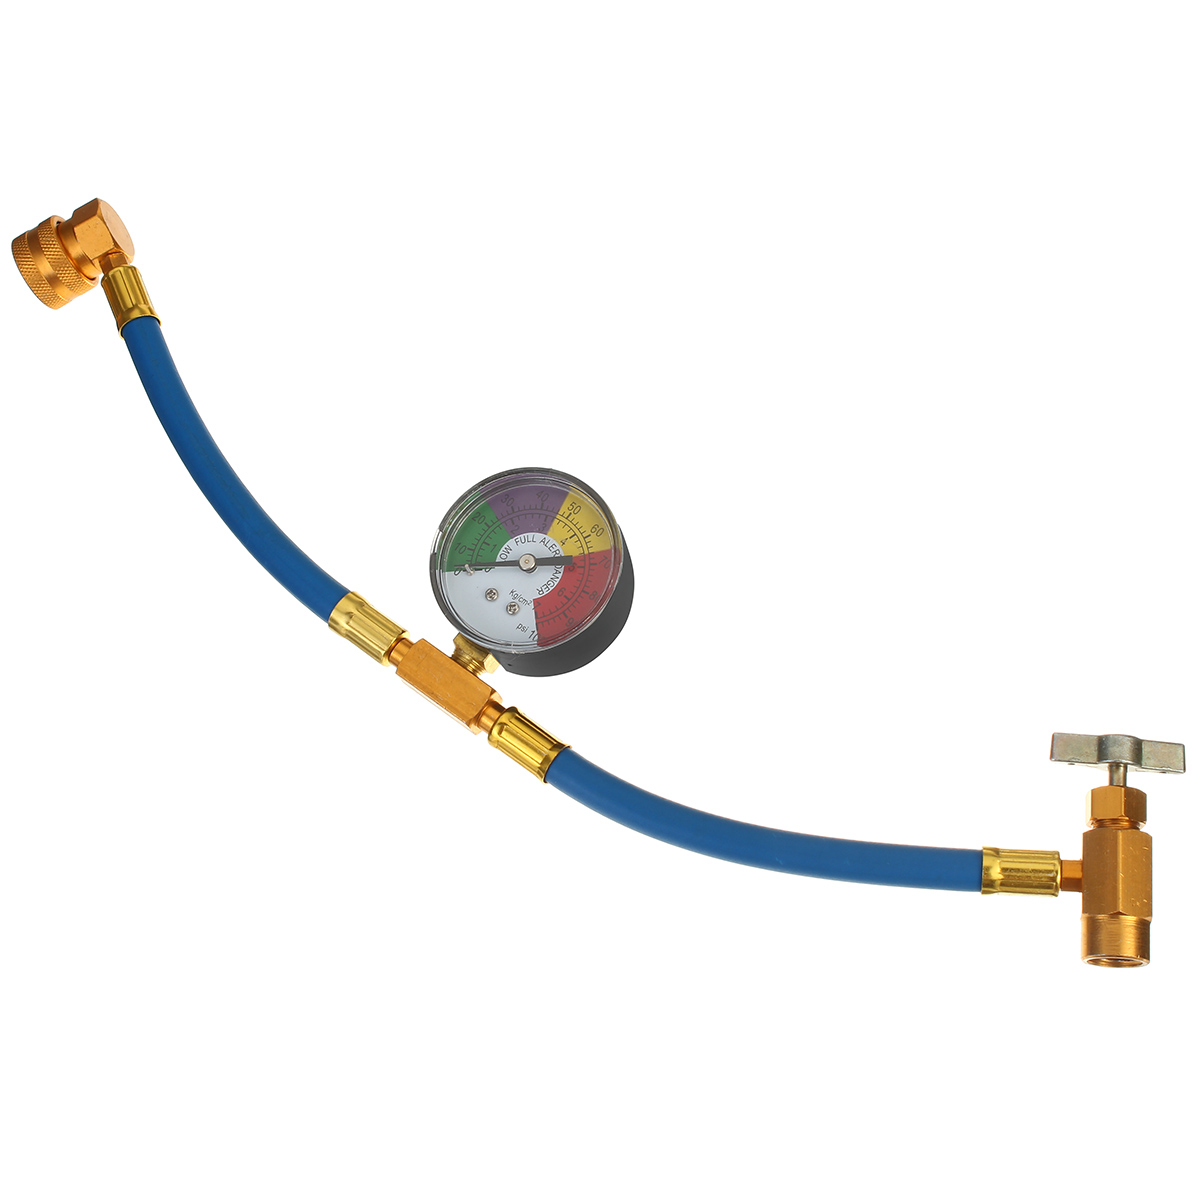 100psi-Air-Conditioning-Recharge-Hose-with-Pressure-Gauge-AC-R134A-12-Inch-Refrigerant-Recharge-Meas-1701031-3